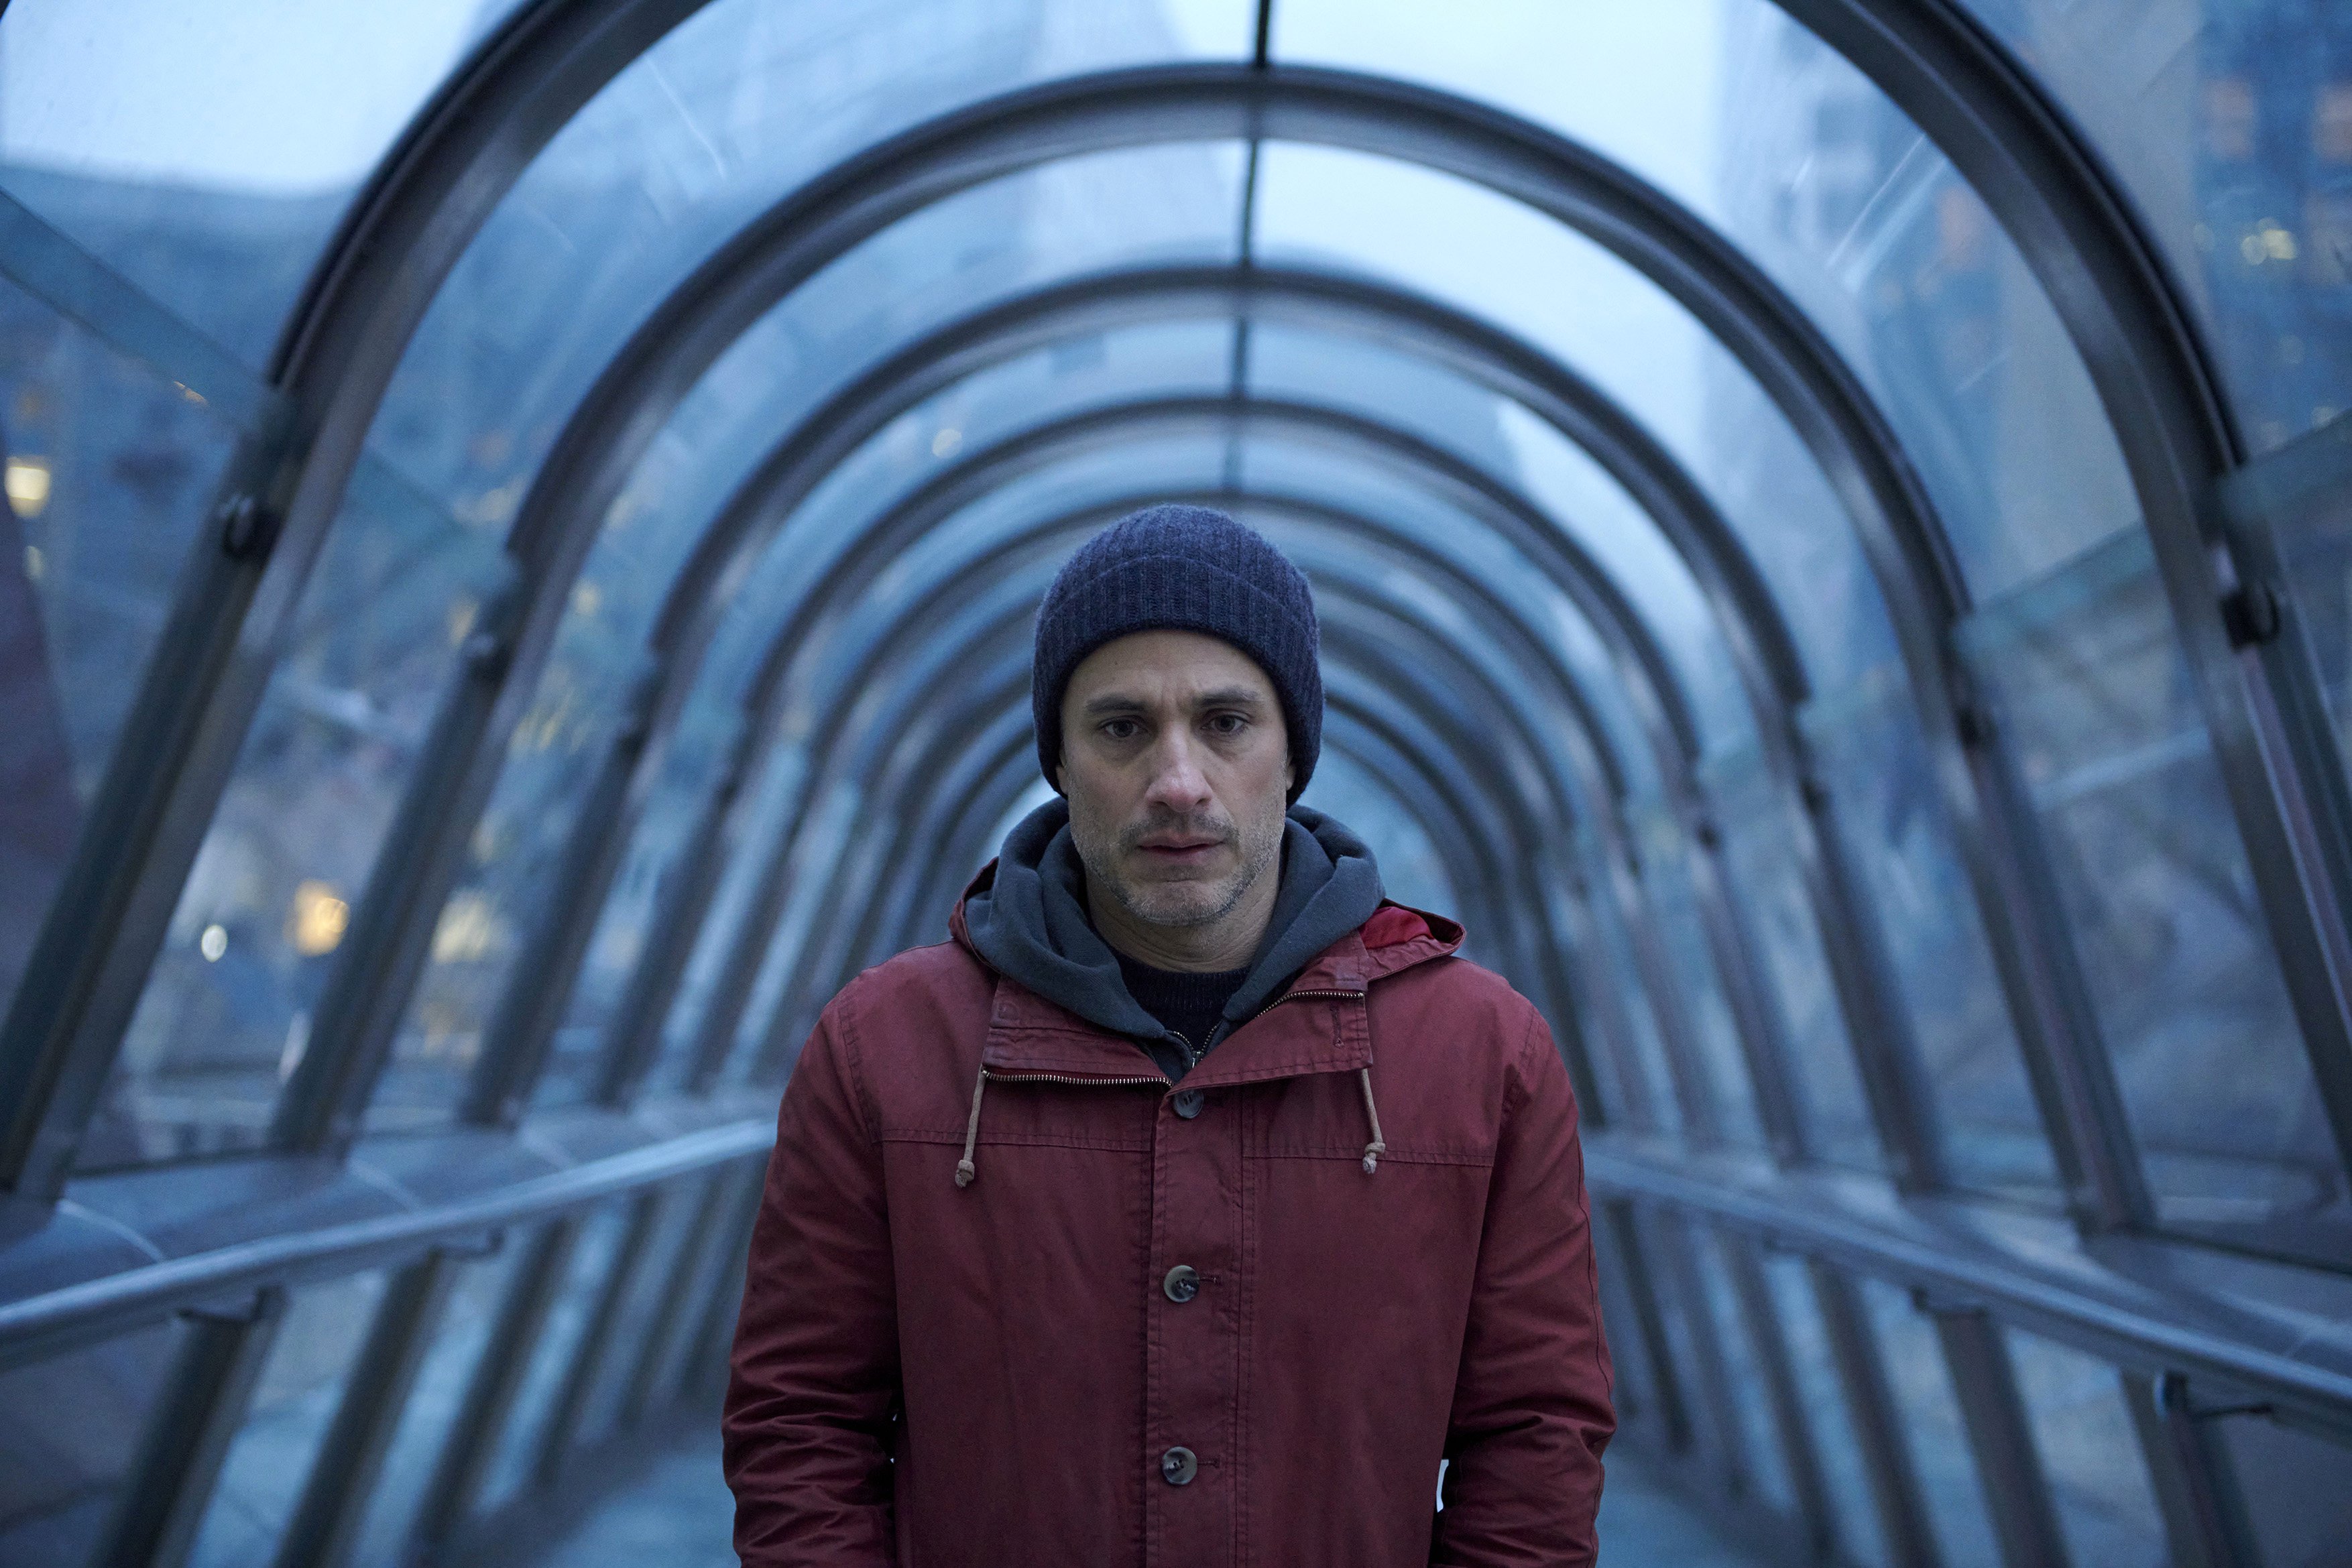 Gael García Bernal in a still from Another End (category to be confirmed). Directed by Piero Messina, the film co-stars Renate Reinsve and Bérénice Bejo. Photo: Matteo Casilli/Indigo Film